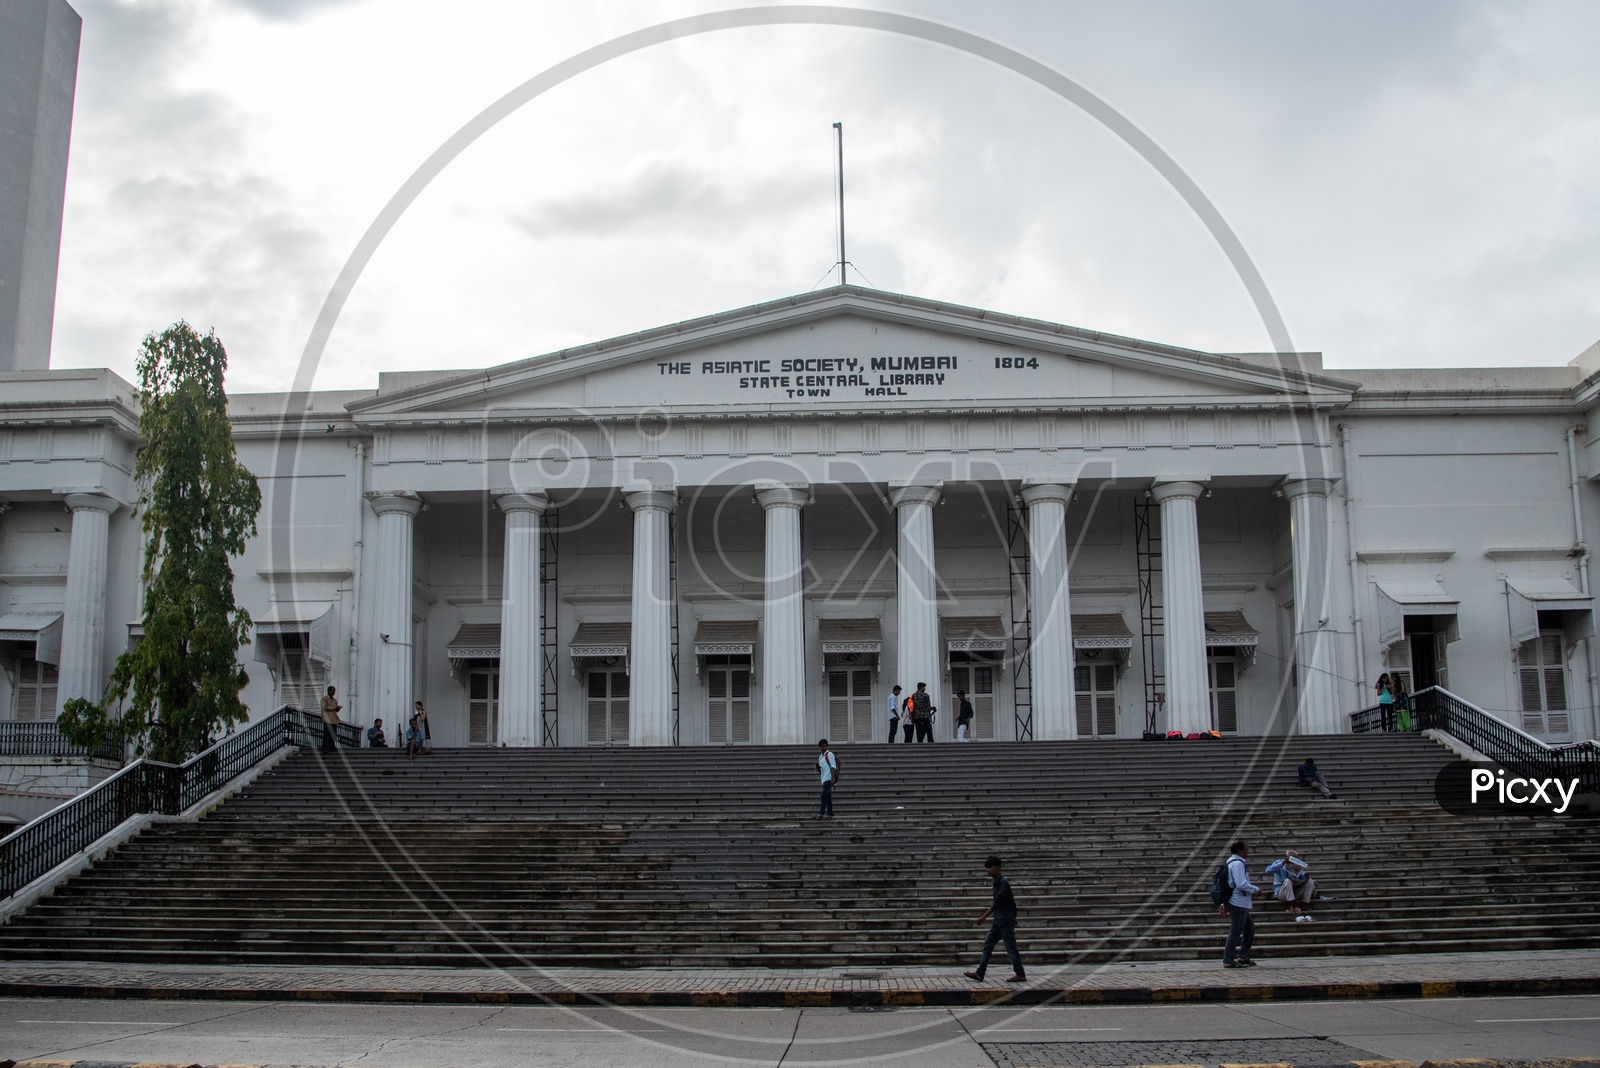 Asiatic Library & Town Hall